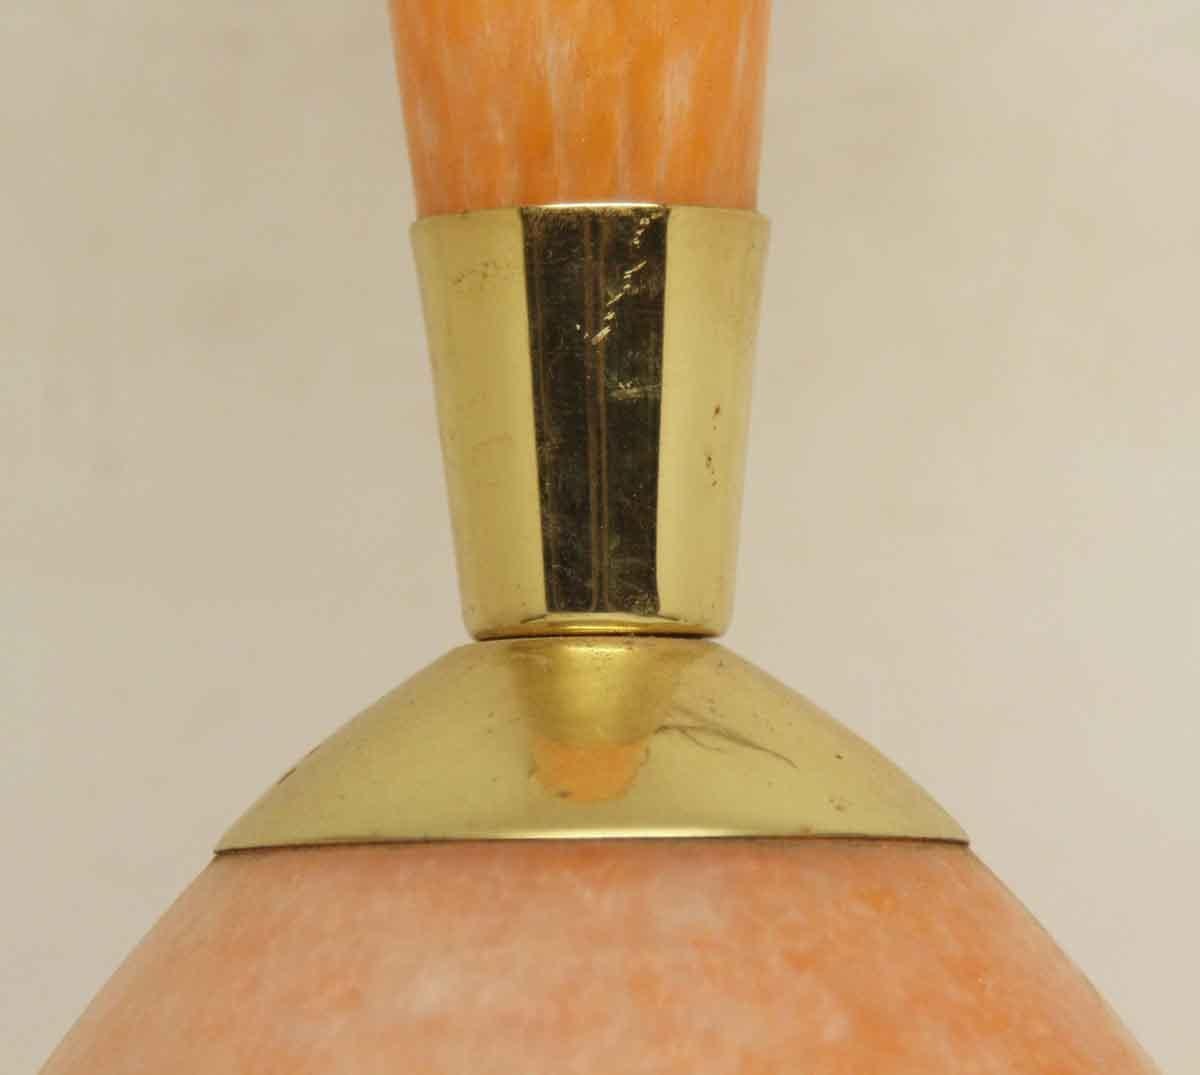 1960s Mid-Century Modern pendant light with an orange blown glass shade and neck with a brass center from France. This light has a small chip. Sold in as is condition. This can be seen at our 400 Gilligan St location in Scranton, PA.